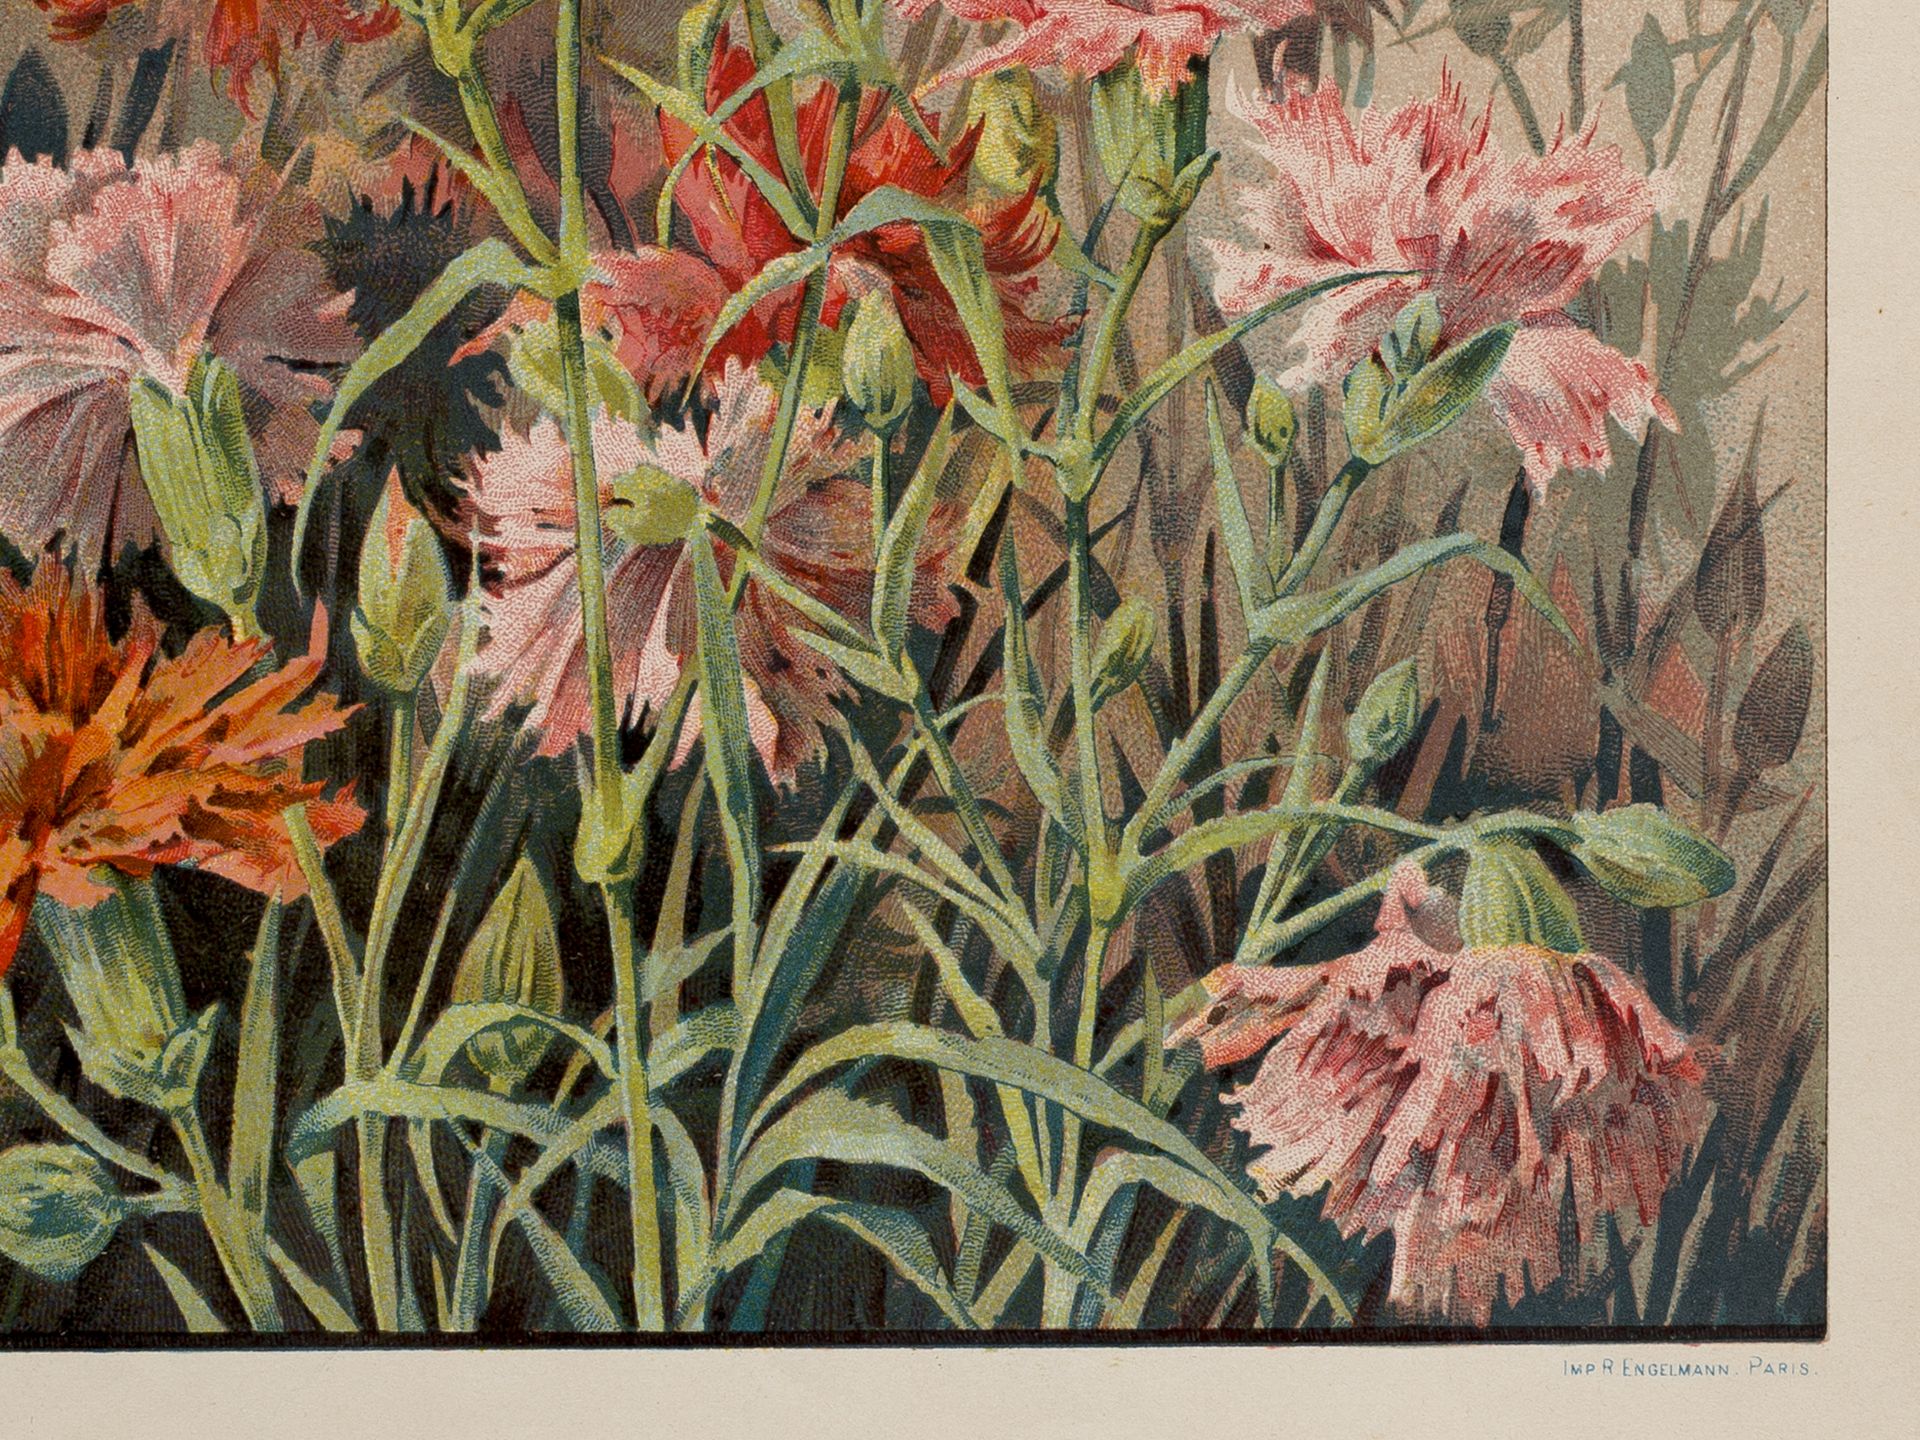 "Carnations", Paris, Early 20th century - Image 2 of 2